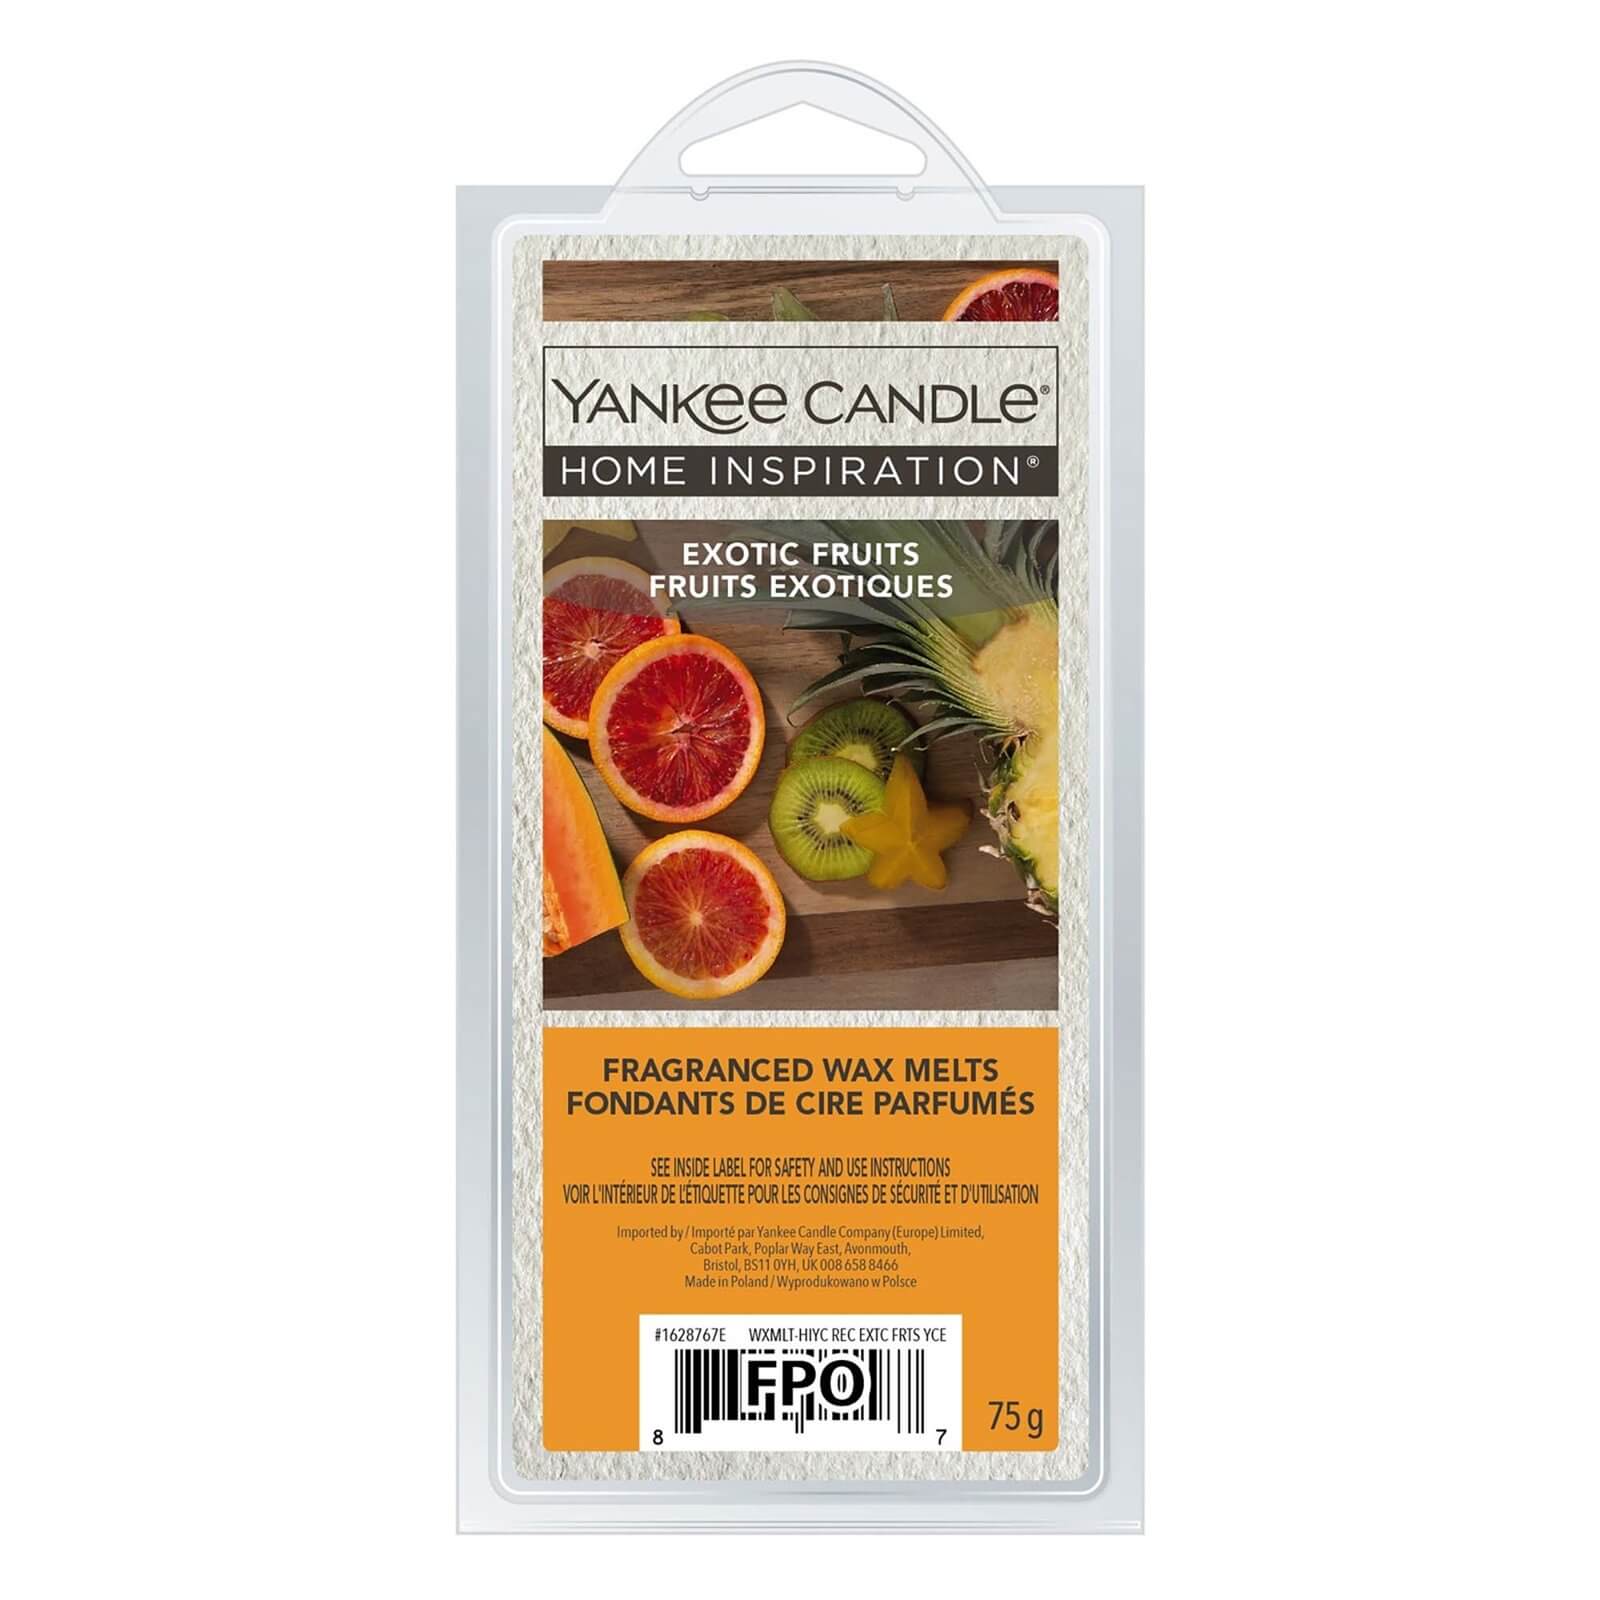 Yankee Candle Home Inspiration Wax Melt - Exotic Fruits